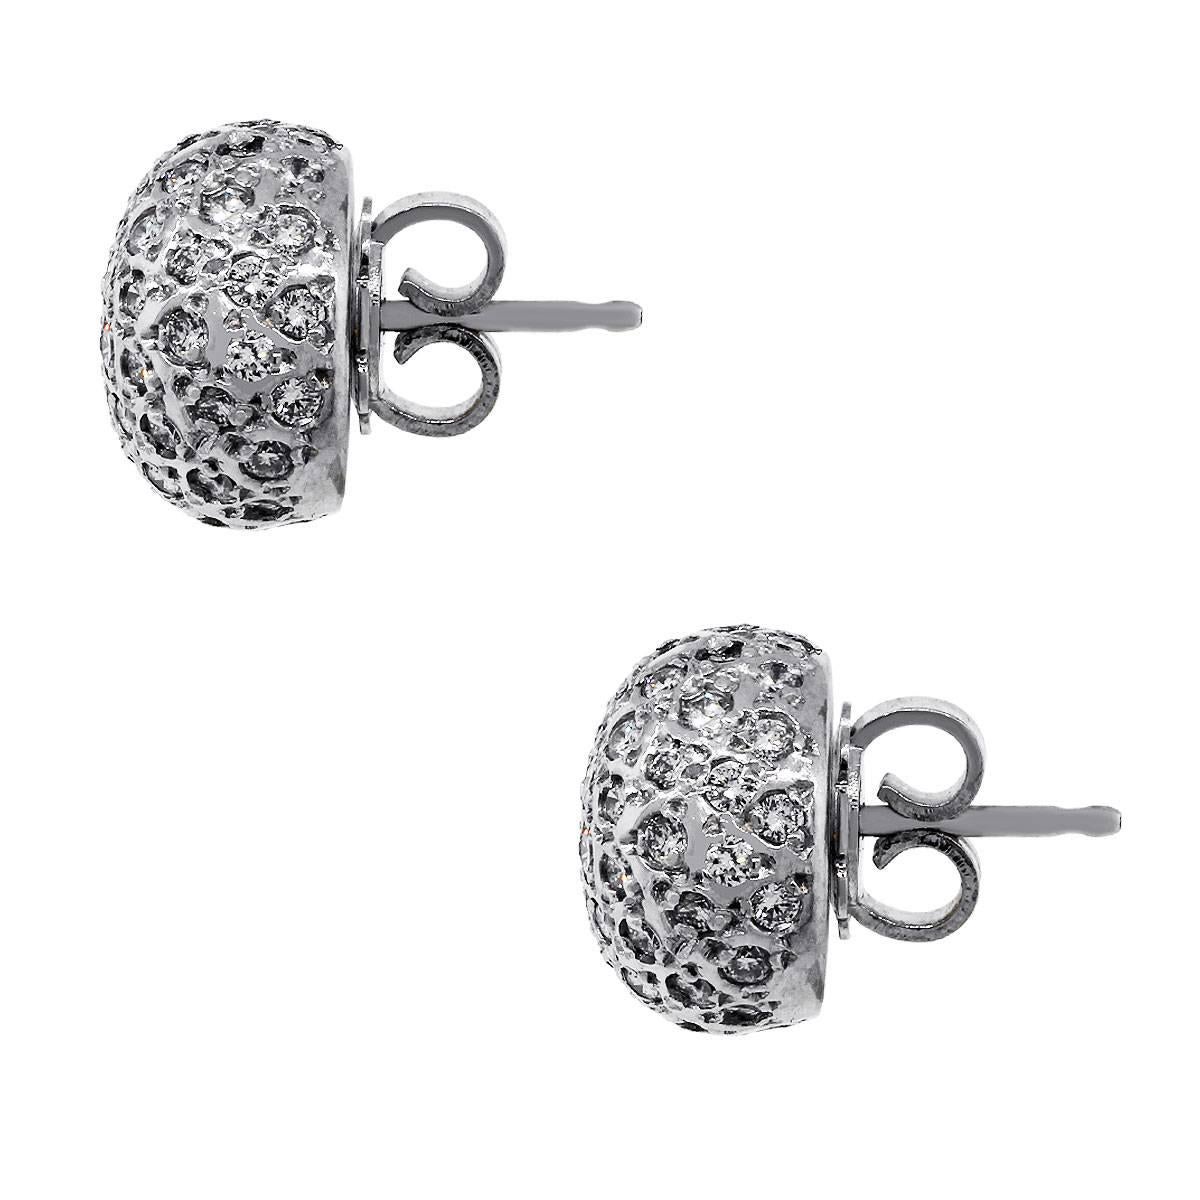 Material: 18k white gold
Diamond Details: Approximately 2ctw of round brilliant diamonds. Diamonds are G/H in color and SI in clarity
Measurements: 0.74″ x 0.47″ x 0.47″
Earring Backs: Post friction
Total Weight: 8.7g (5.6dwt)
SKU: A30310491